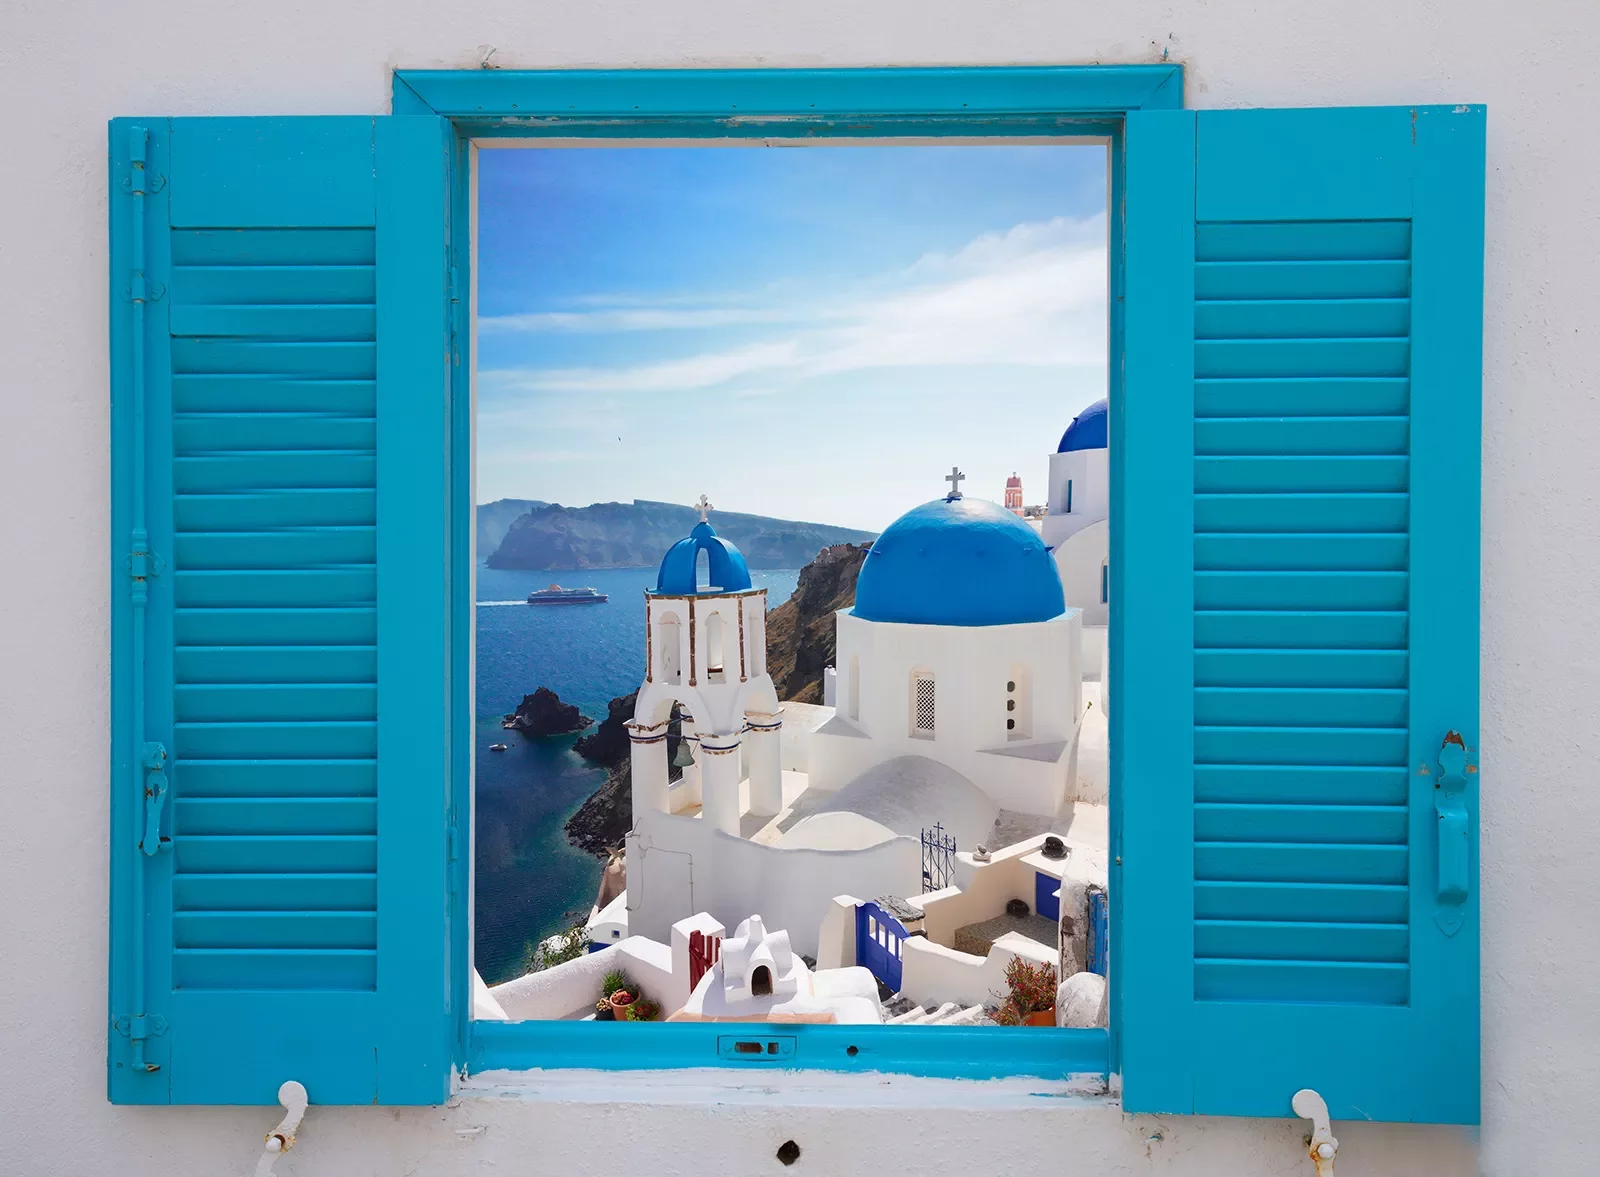 Light blue windowsill, overlooking blue and white Mediterranean domed houses.